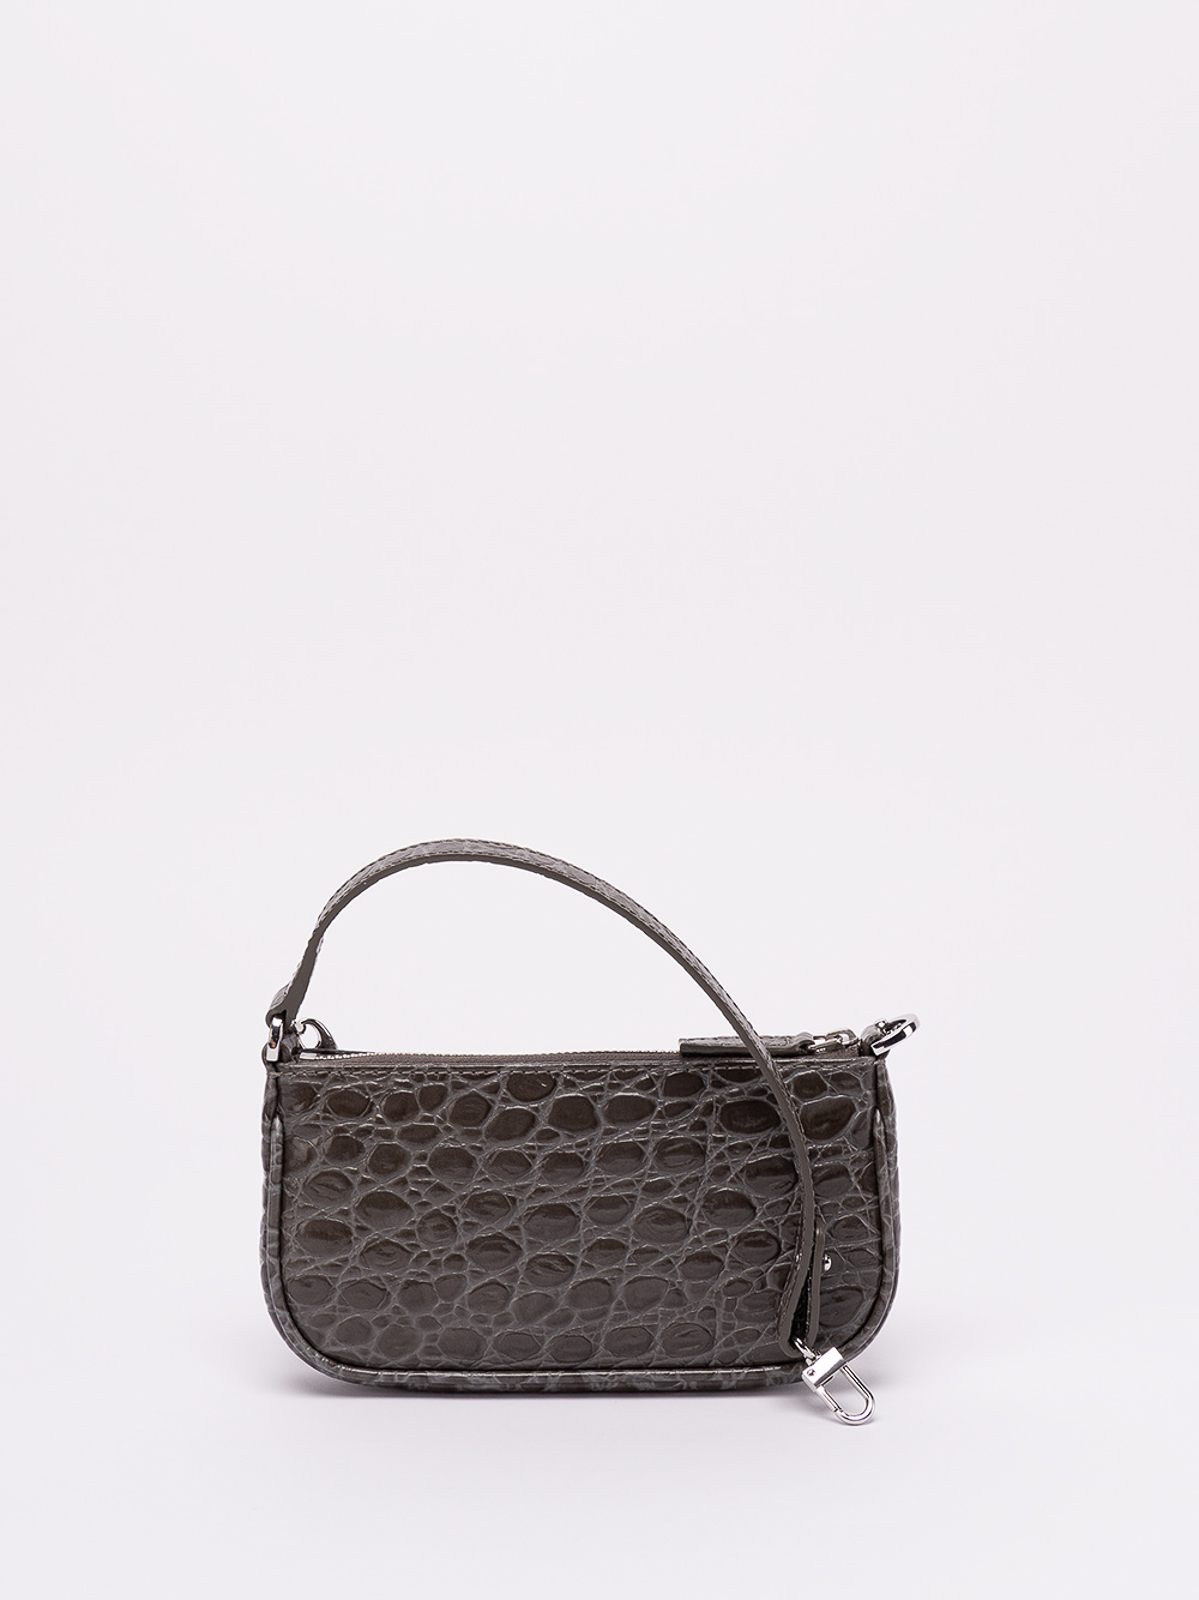 By FAR Shoulderbag RACHEL Patent leather online shopping 